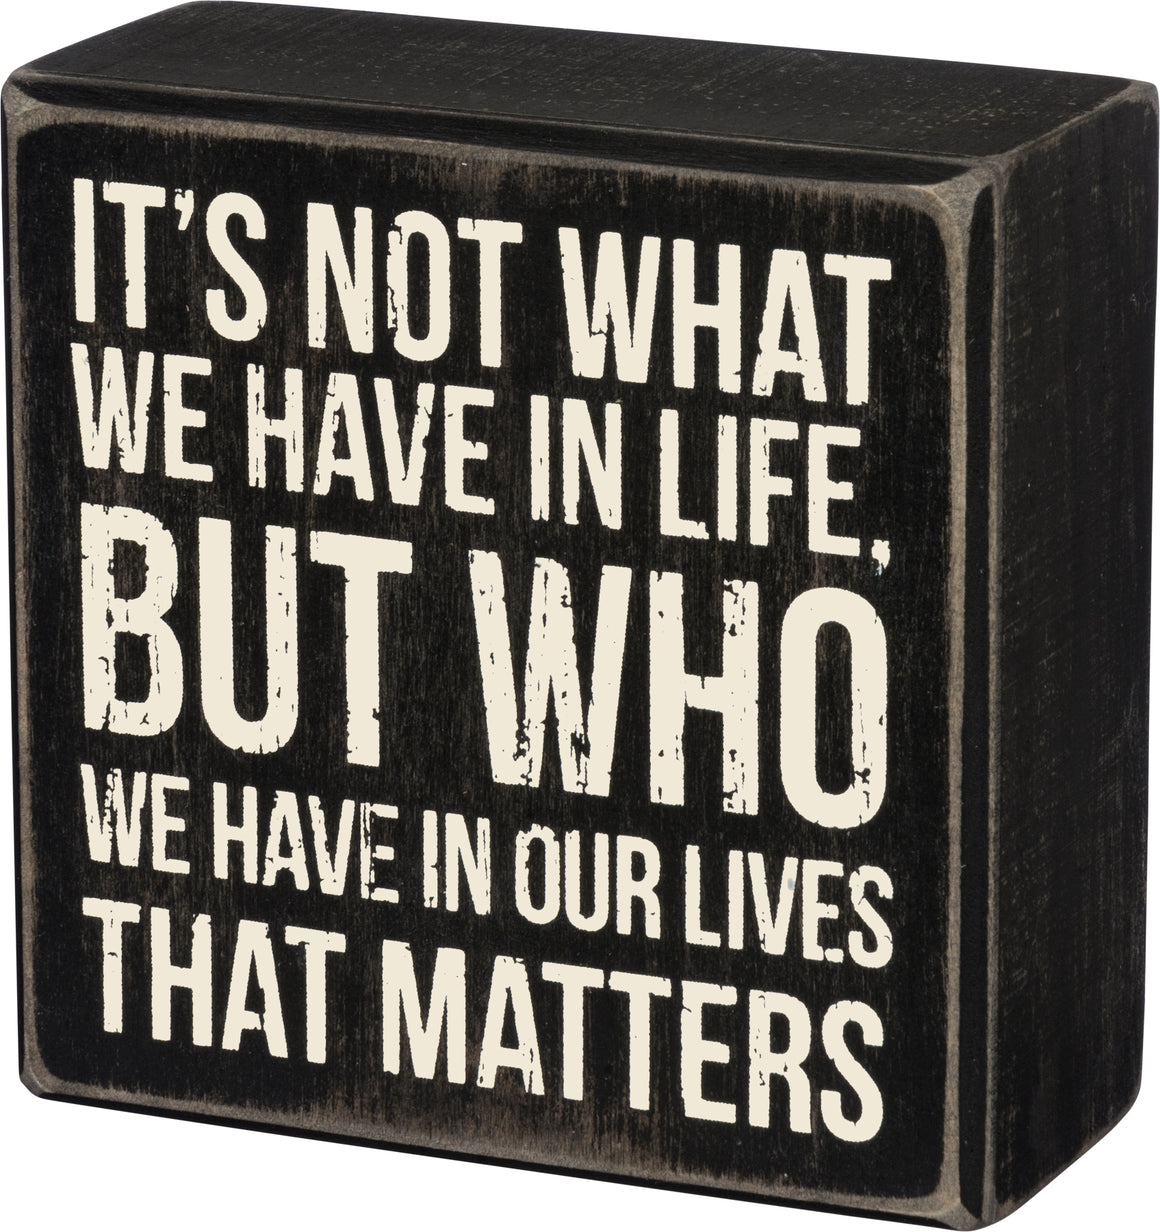 It's Not What We Have in Life, But Who We Have in Our Lives That Matters Box Sign